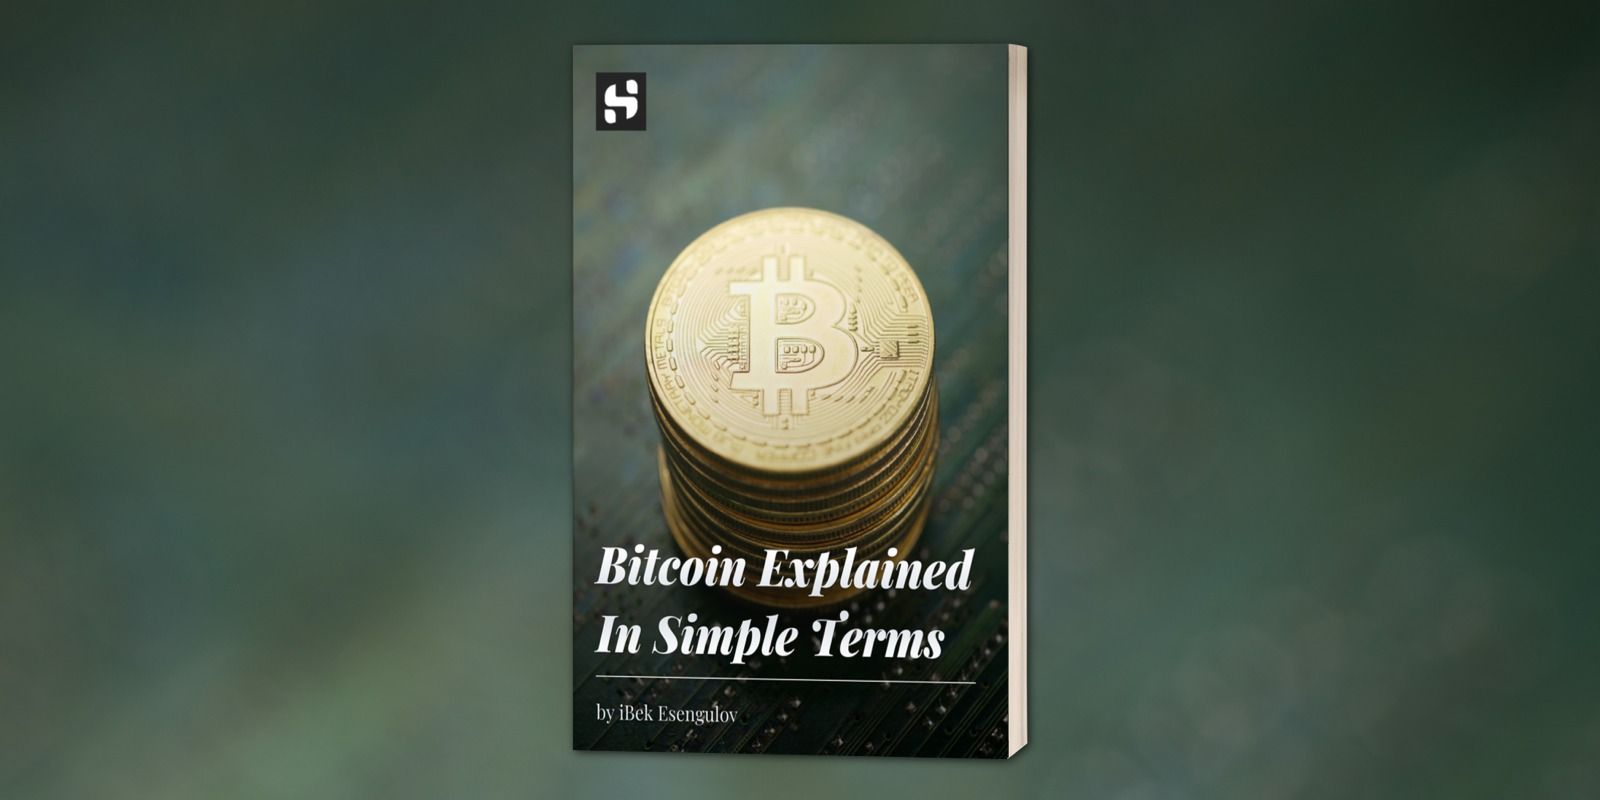 Bitcoin Explained in Simple Terms